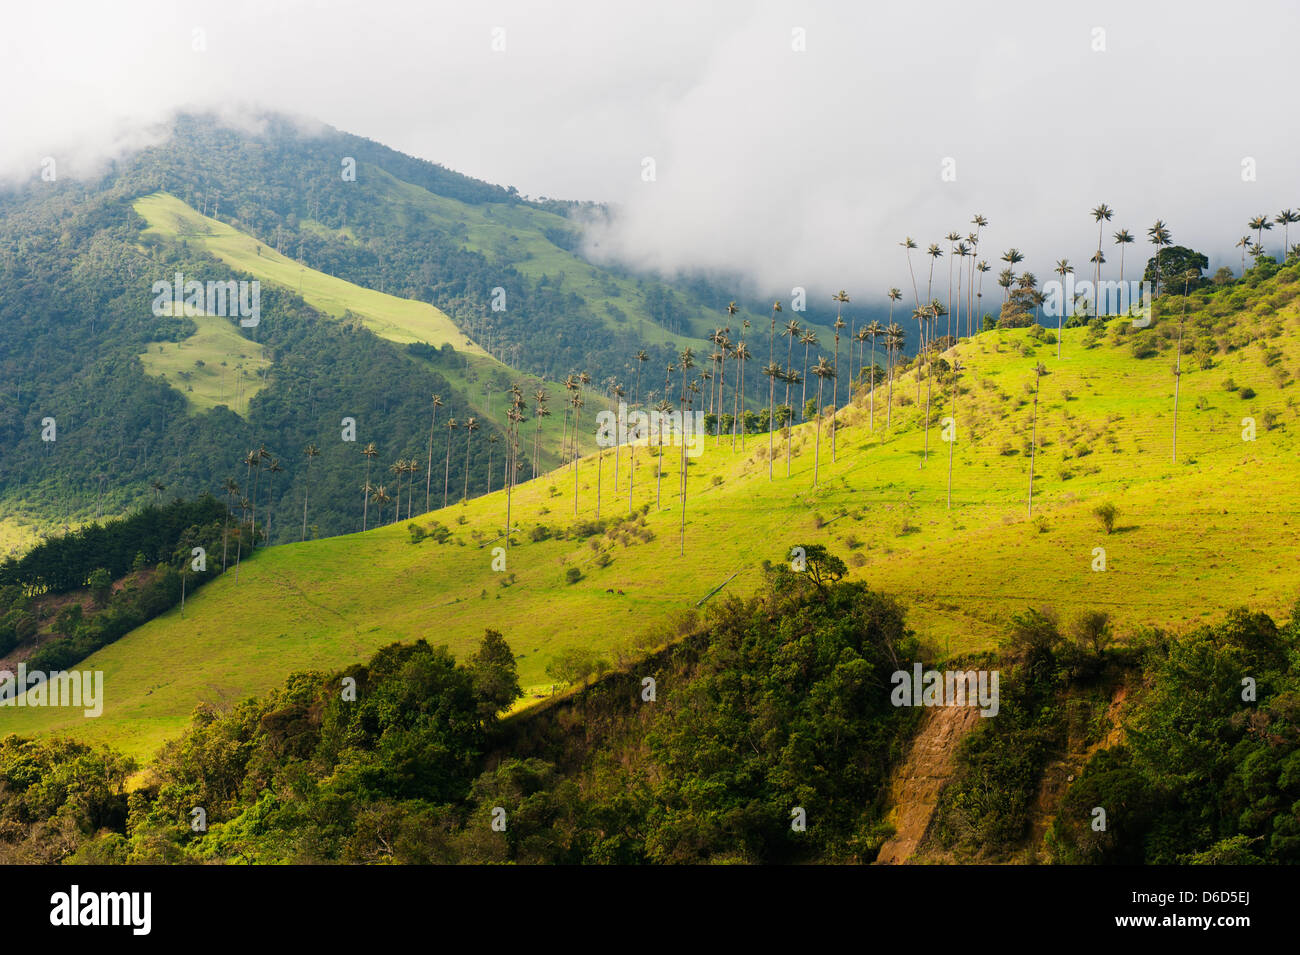 wax palm trees in Cocora Valley, Salento, Colombia, South America Stock Photo